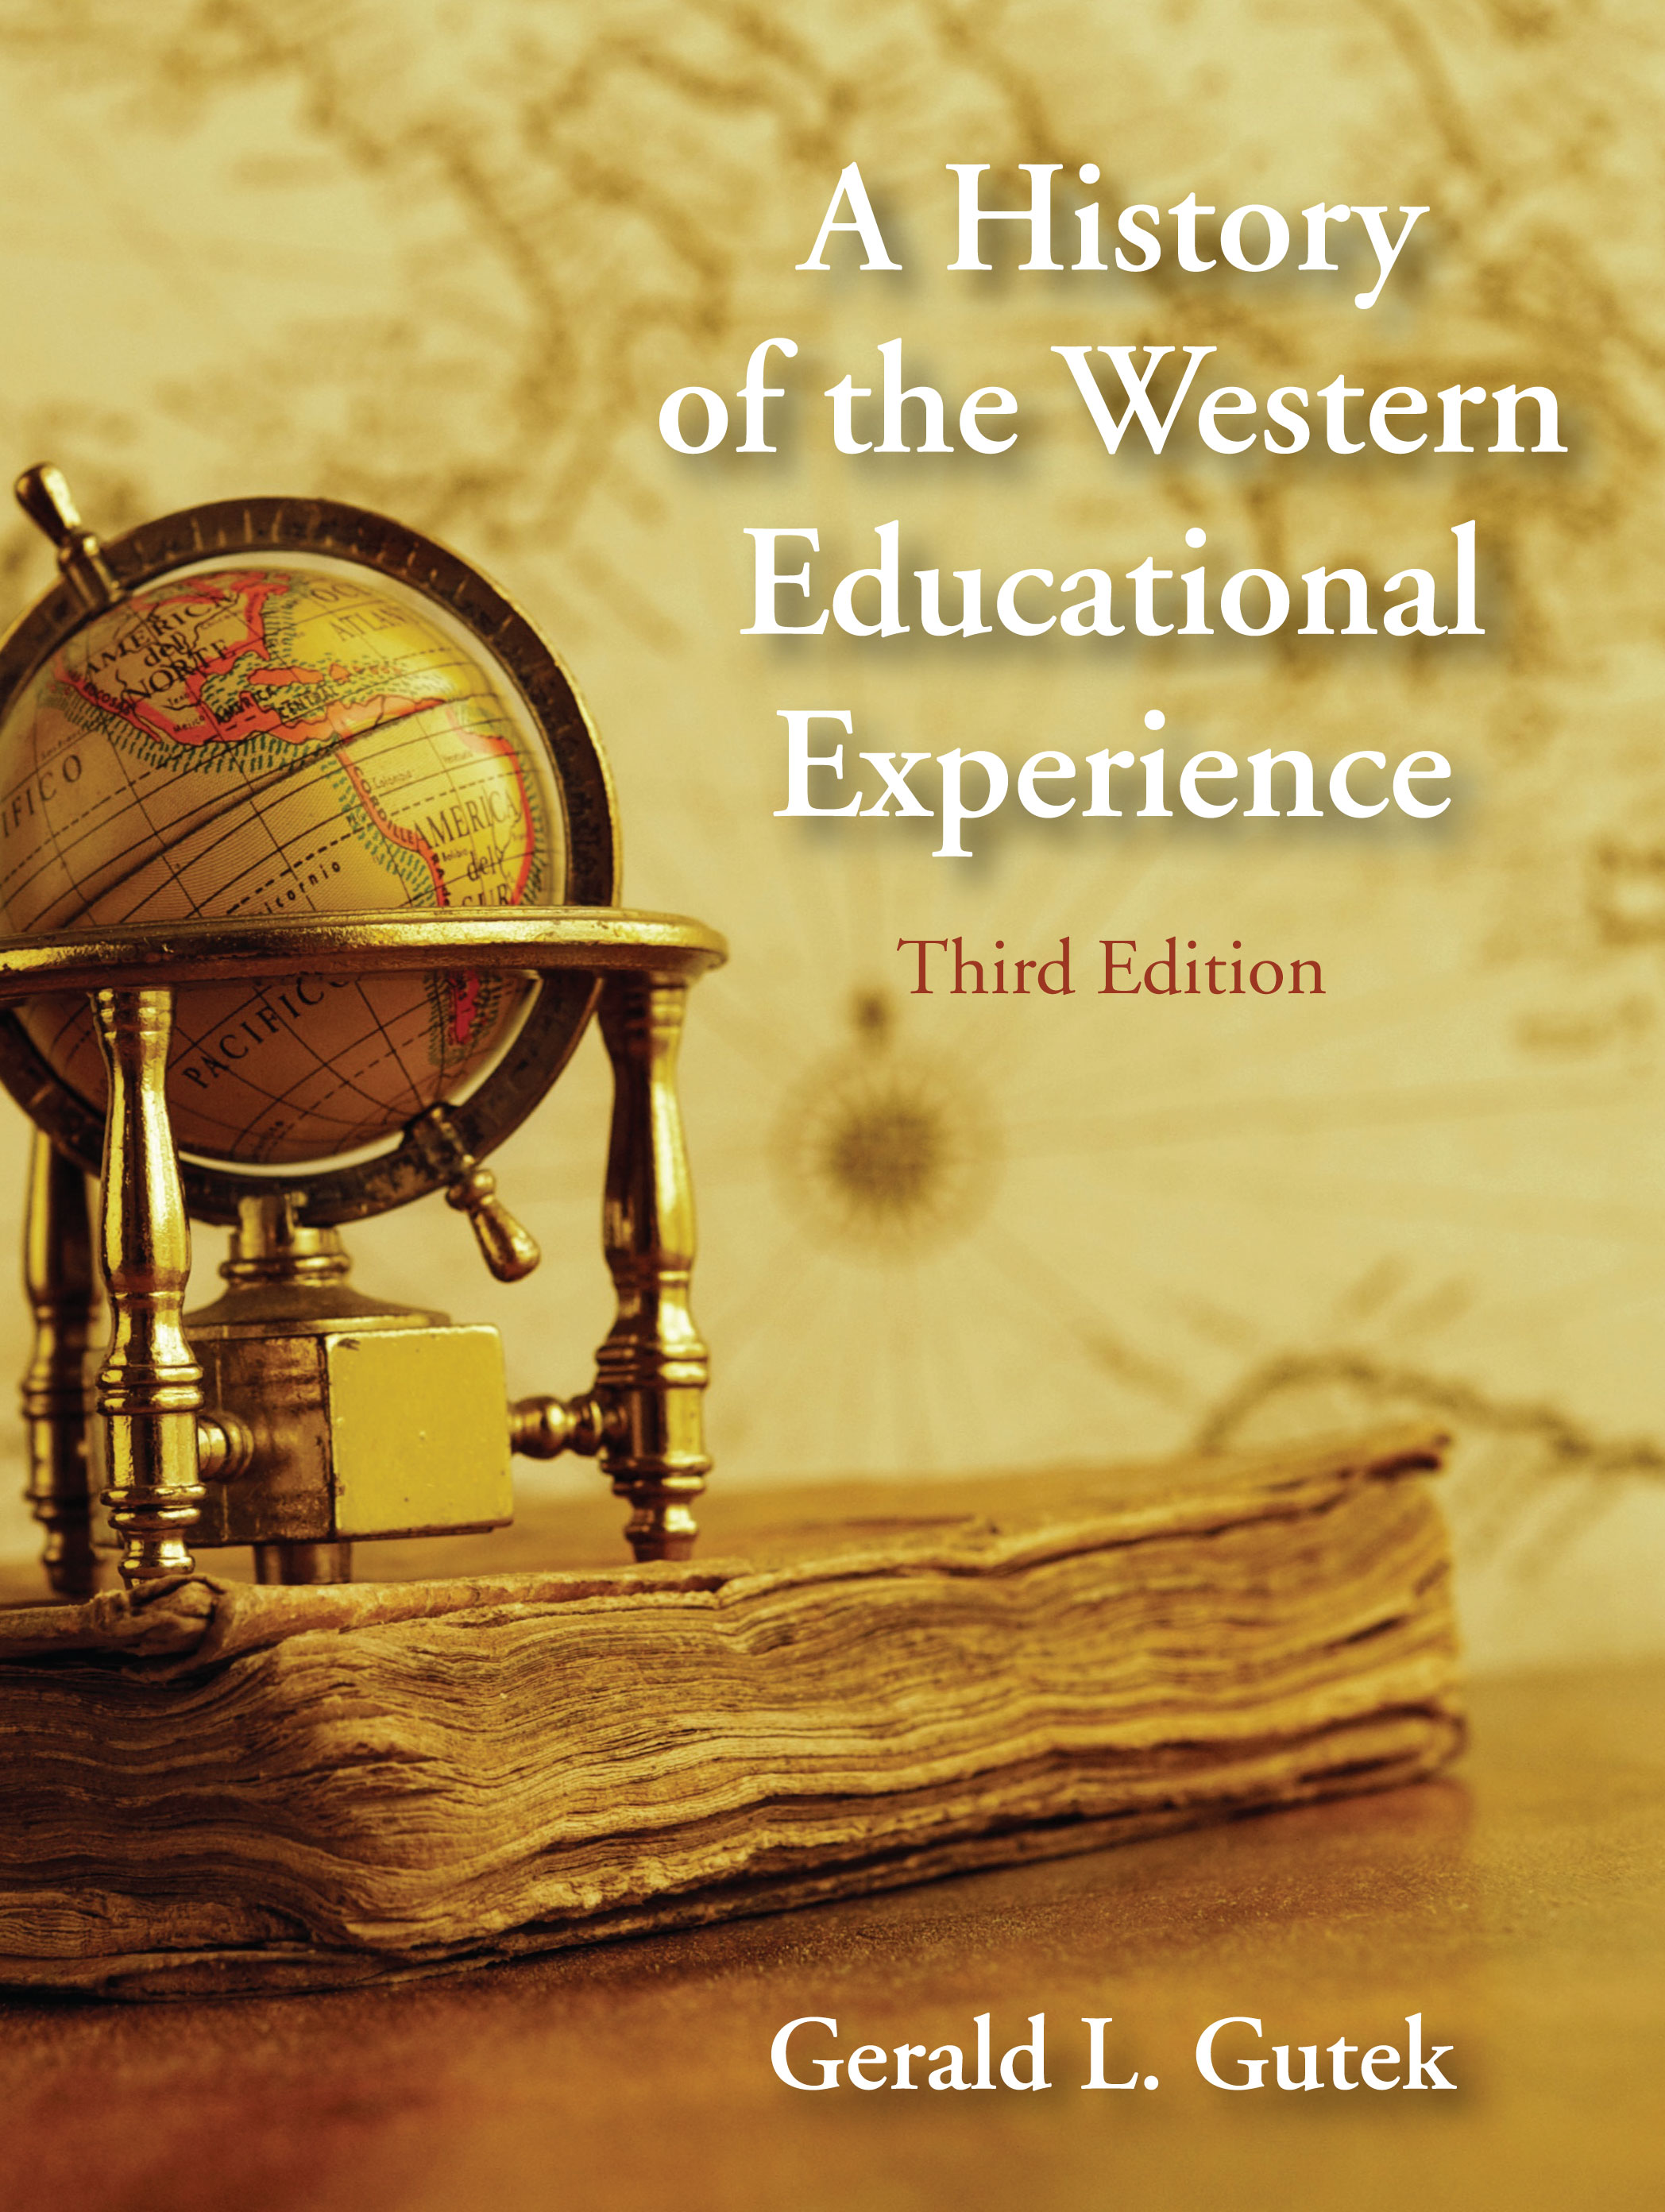 A History of the Western Educational Experience: Third Edition by Gerald L. Gutek